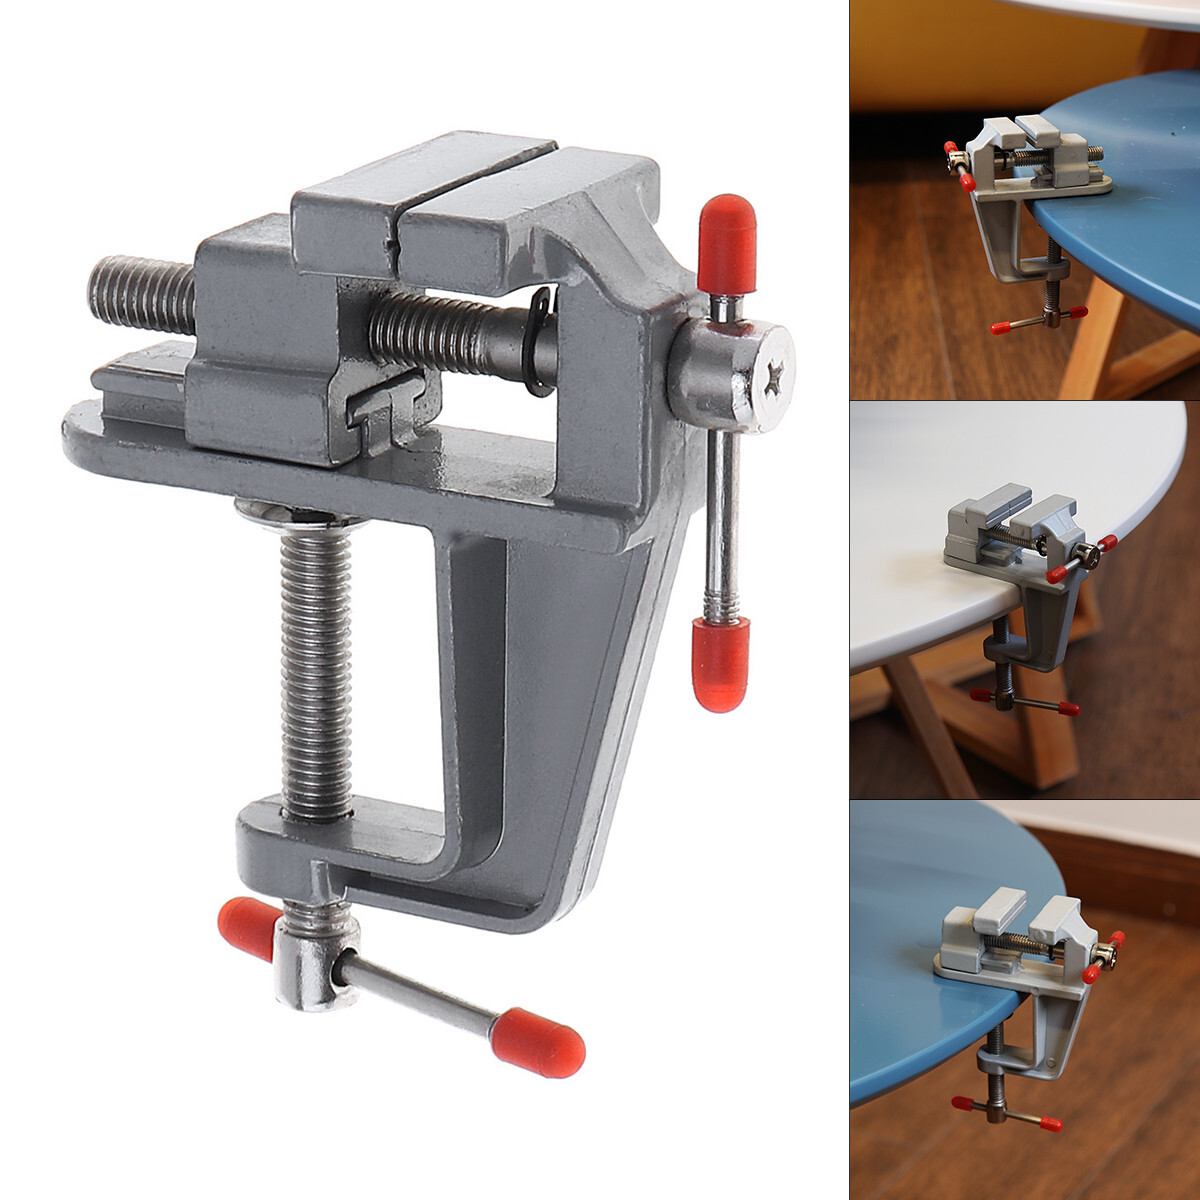 Universal Rotate 360° Work Clamp-on Vise